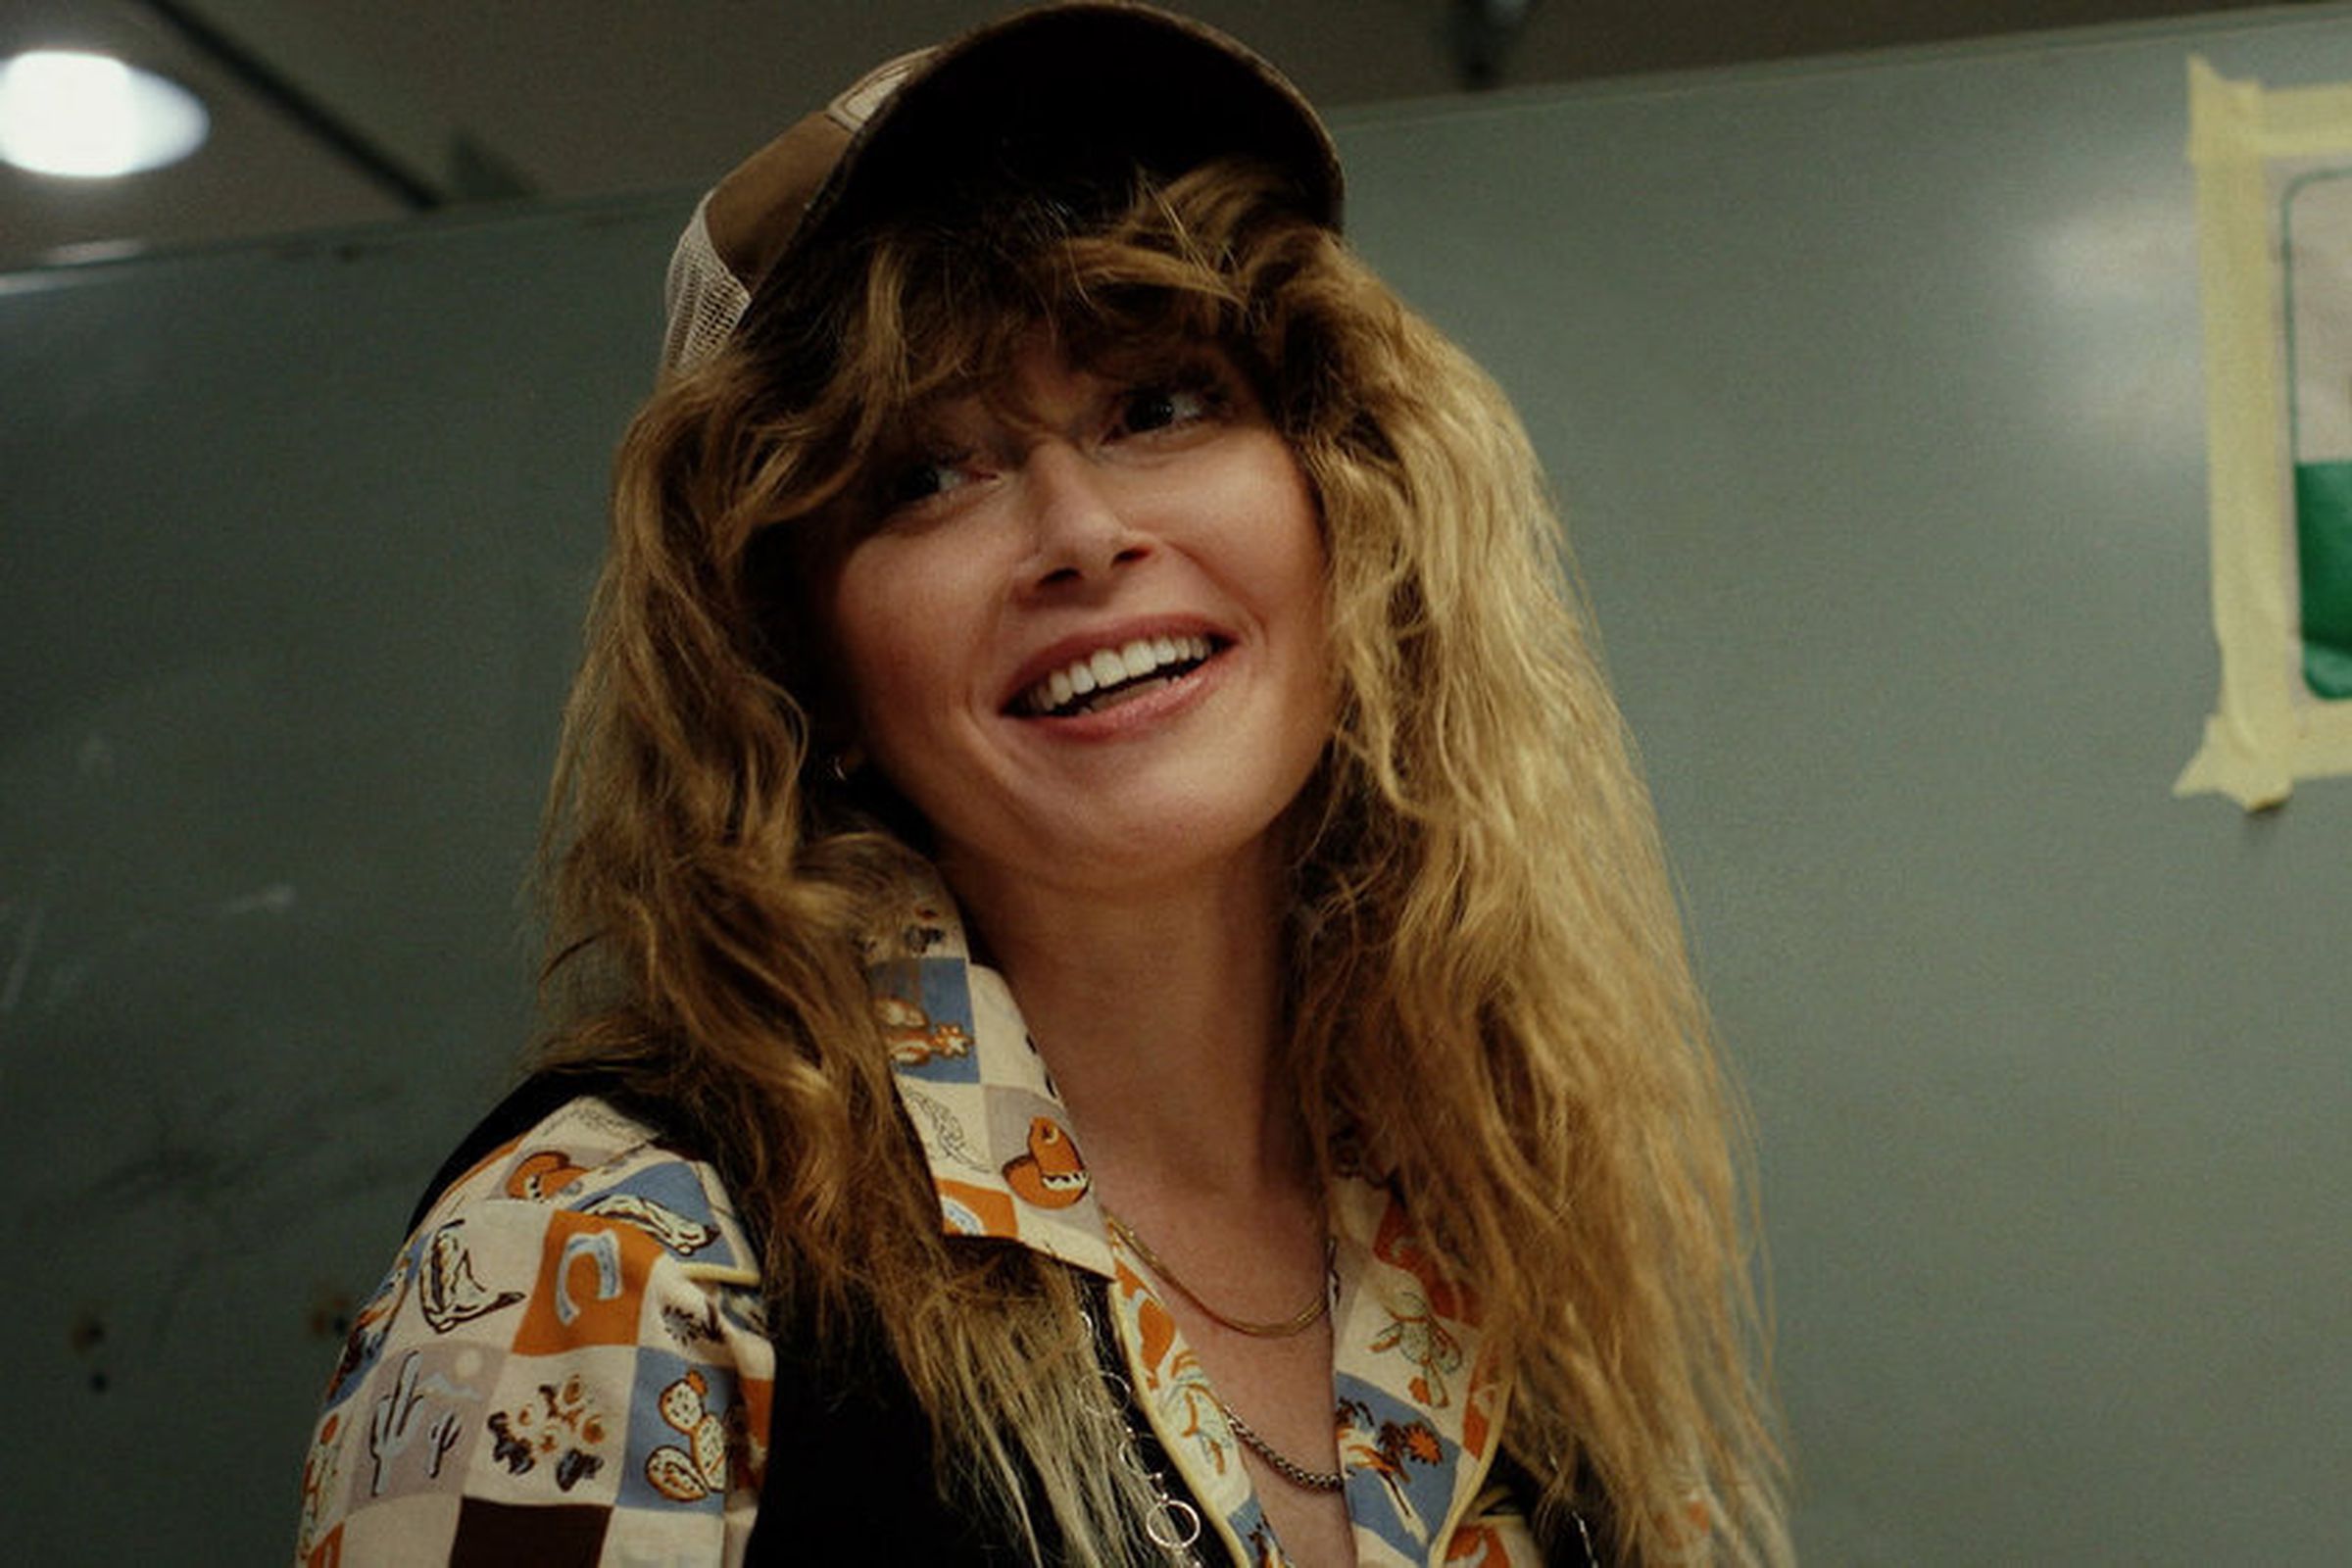 A woman in a hat, a blouse, and a vest, smiling.